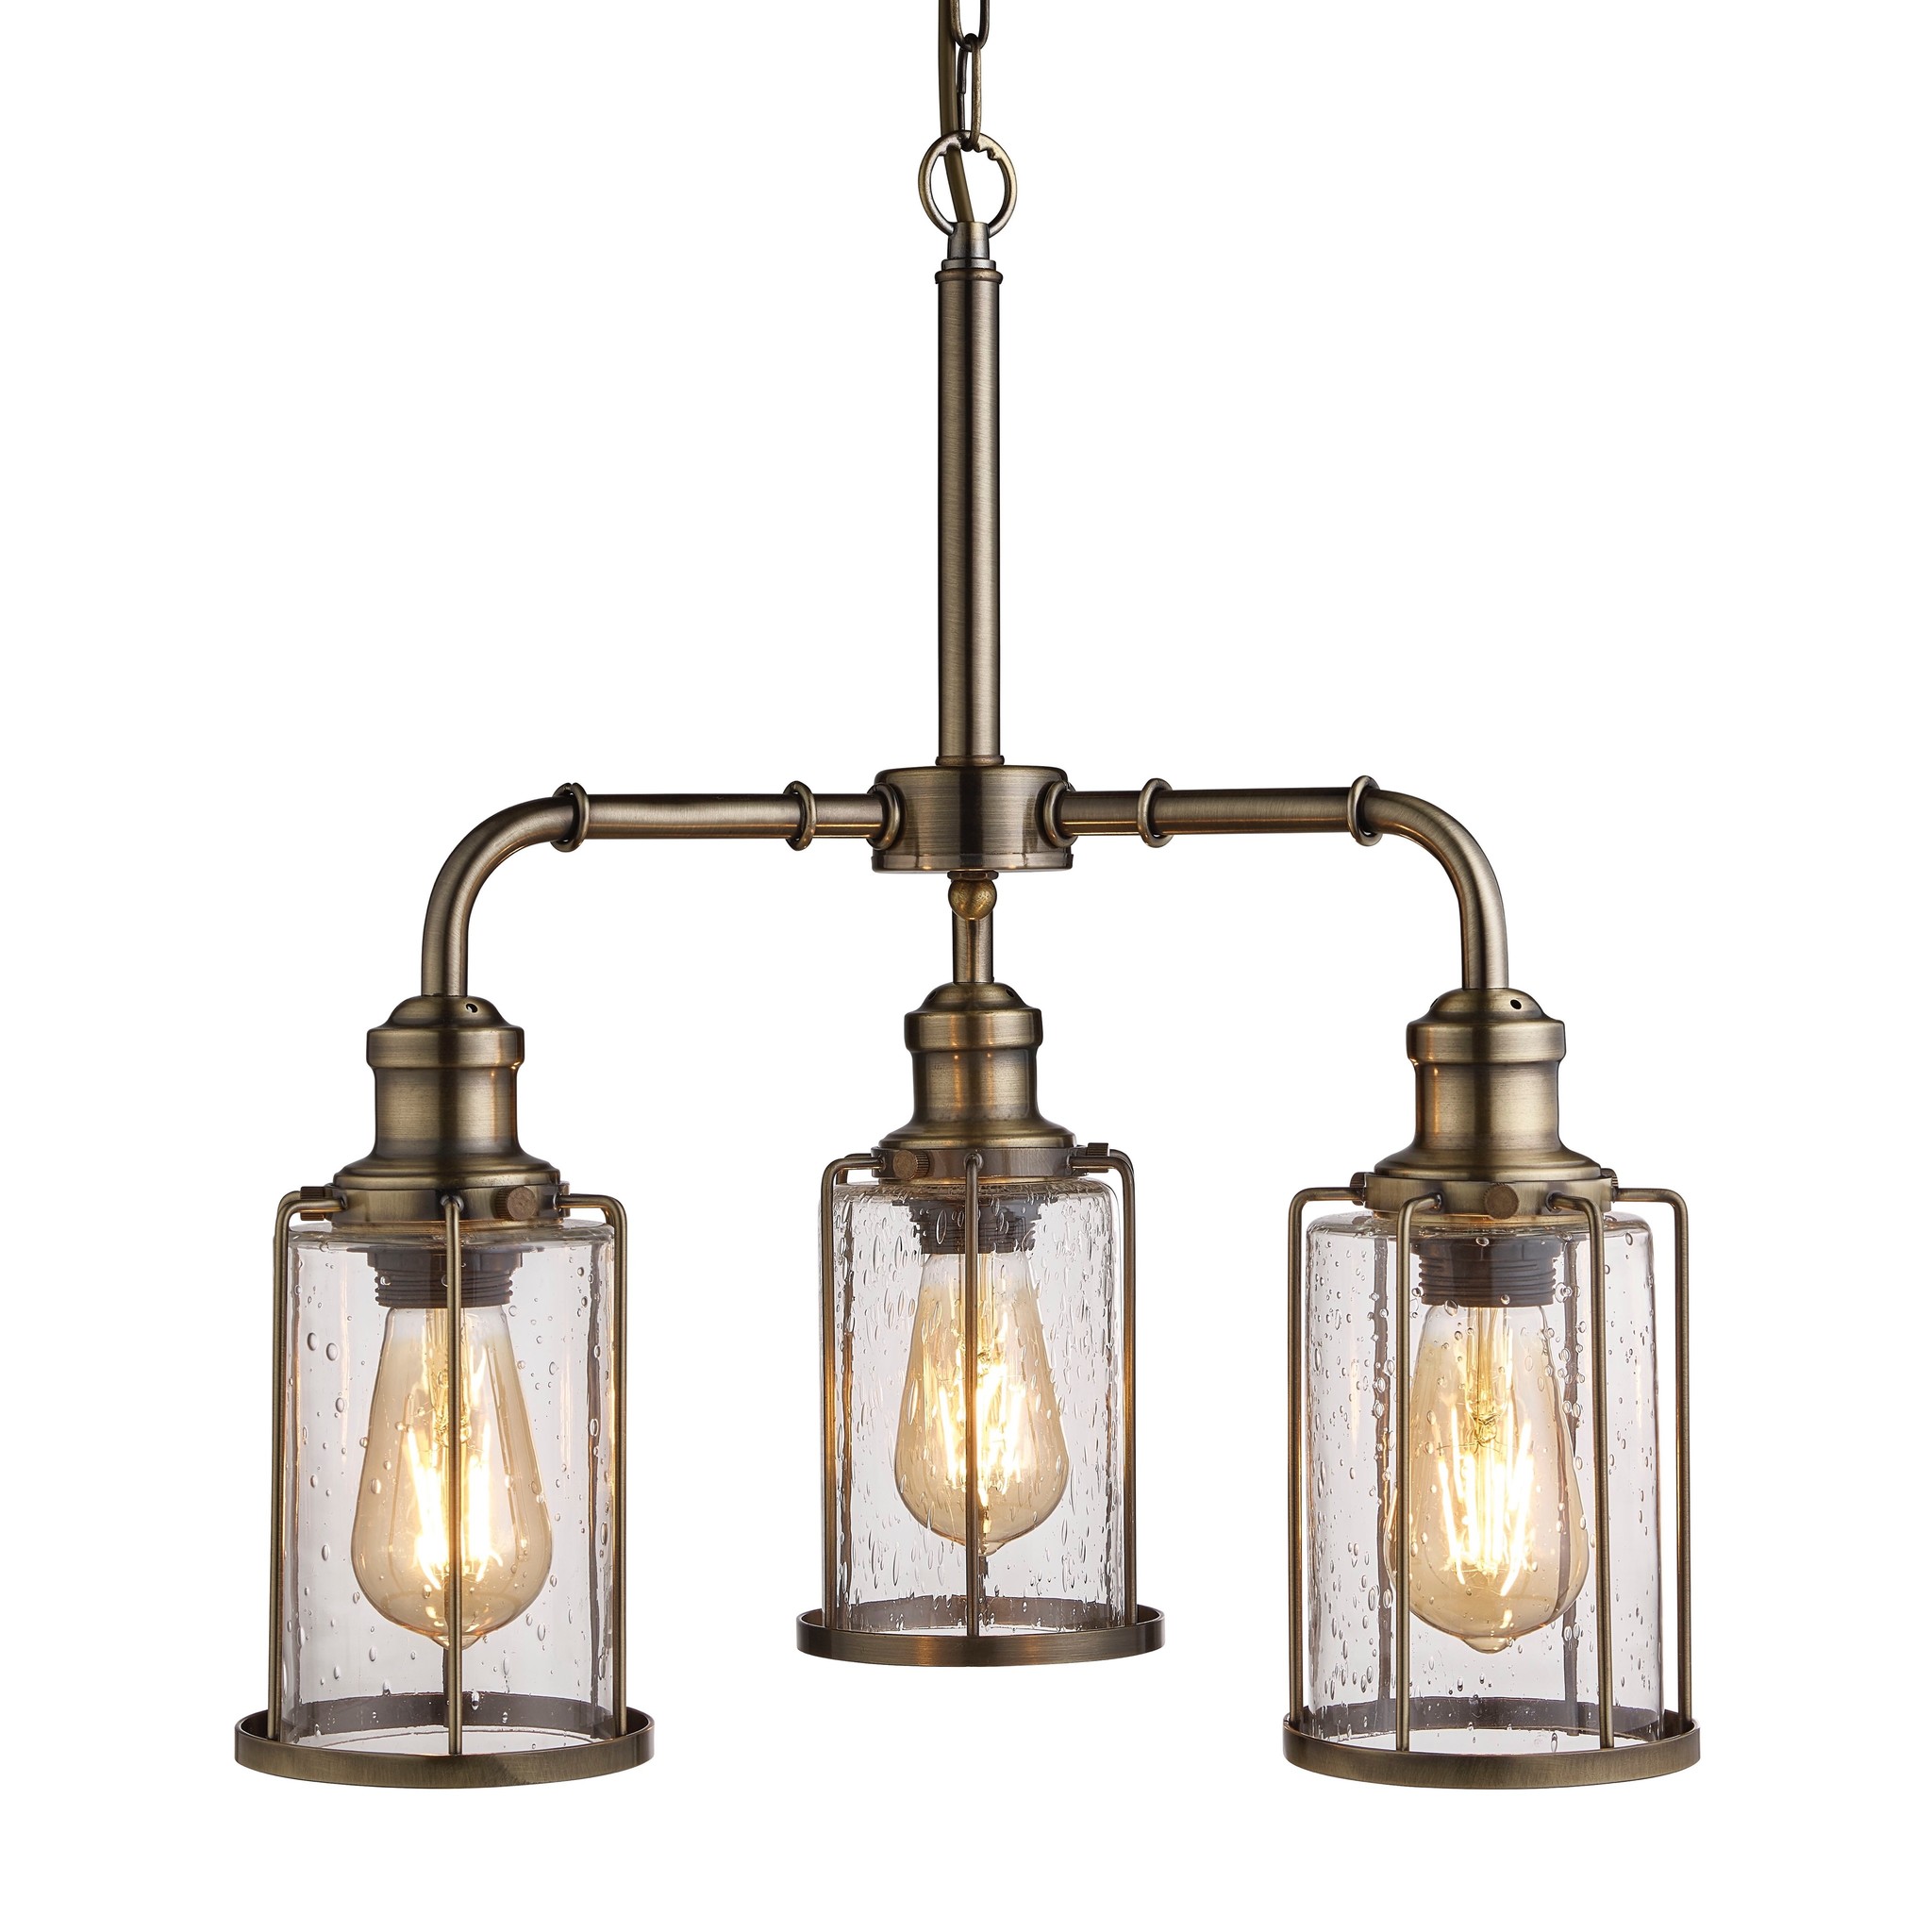 Industrial Pipe 3 Light Feature Ceiling Light Antique Brass Seeded Glass